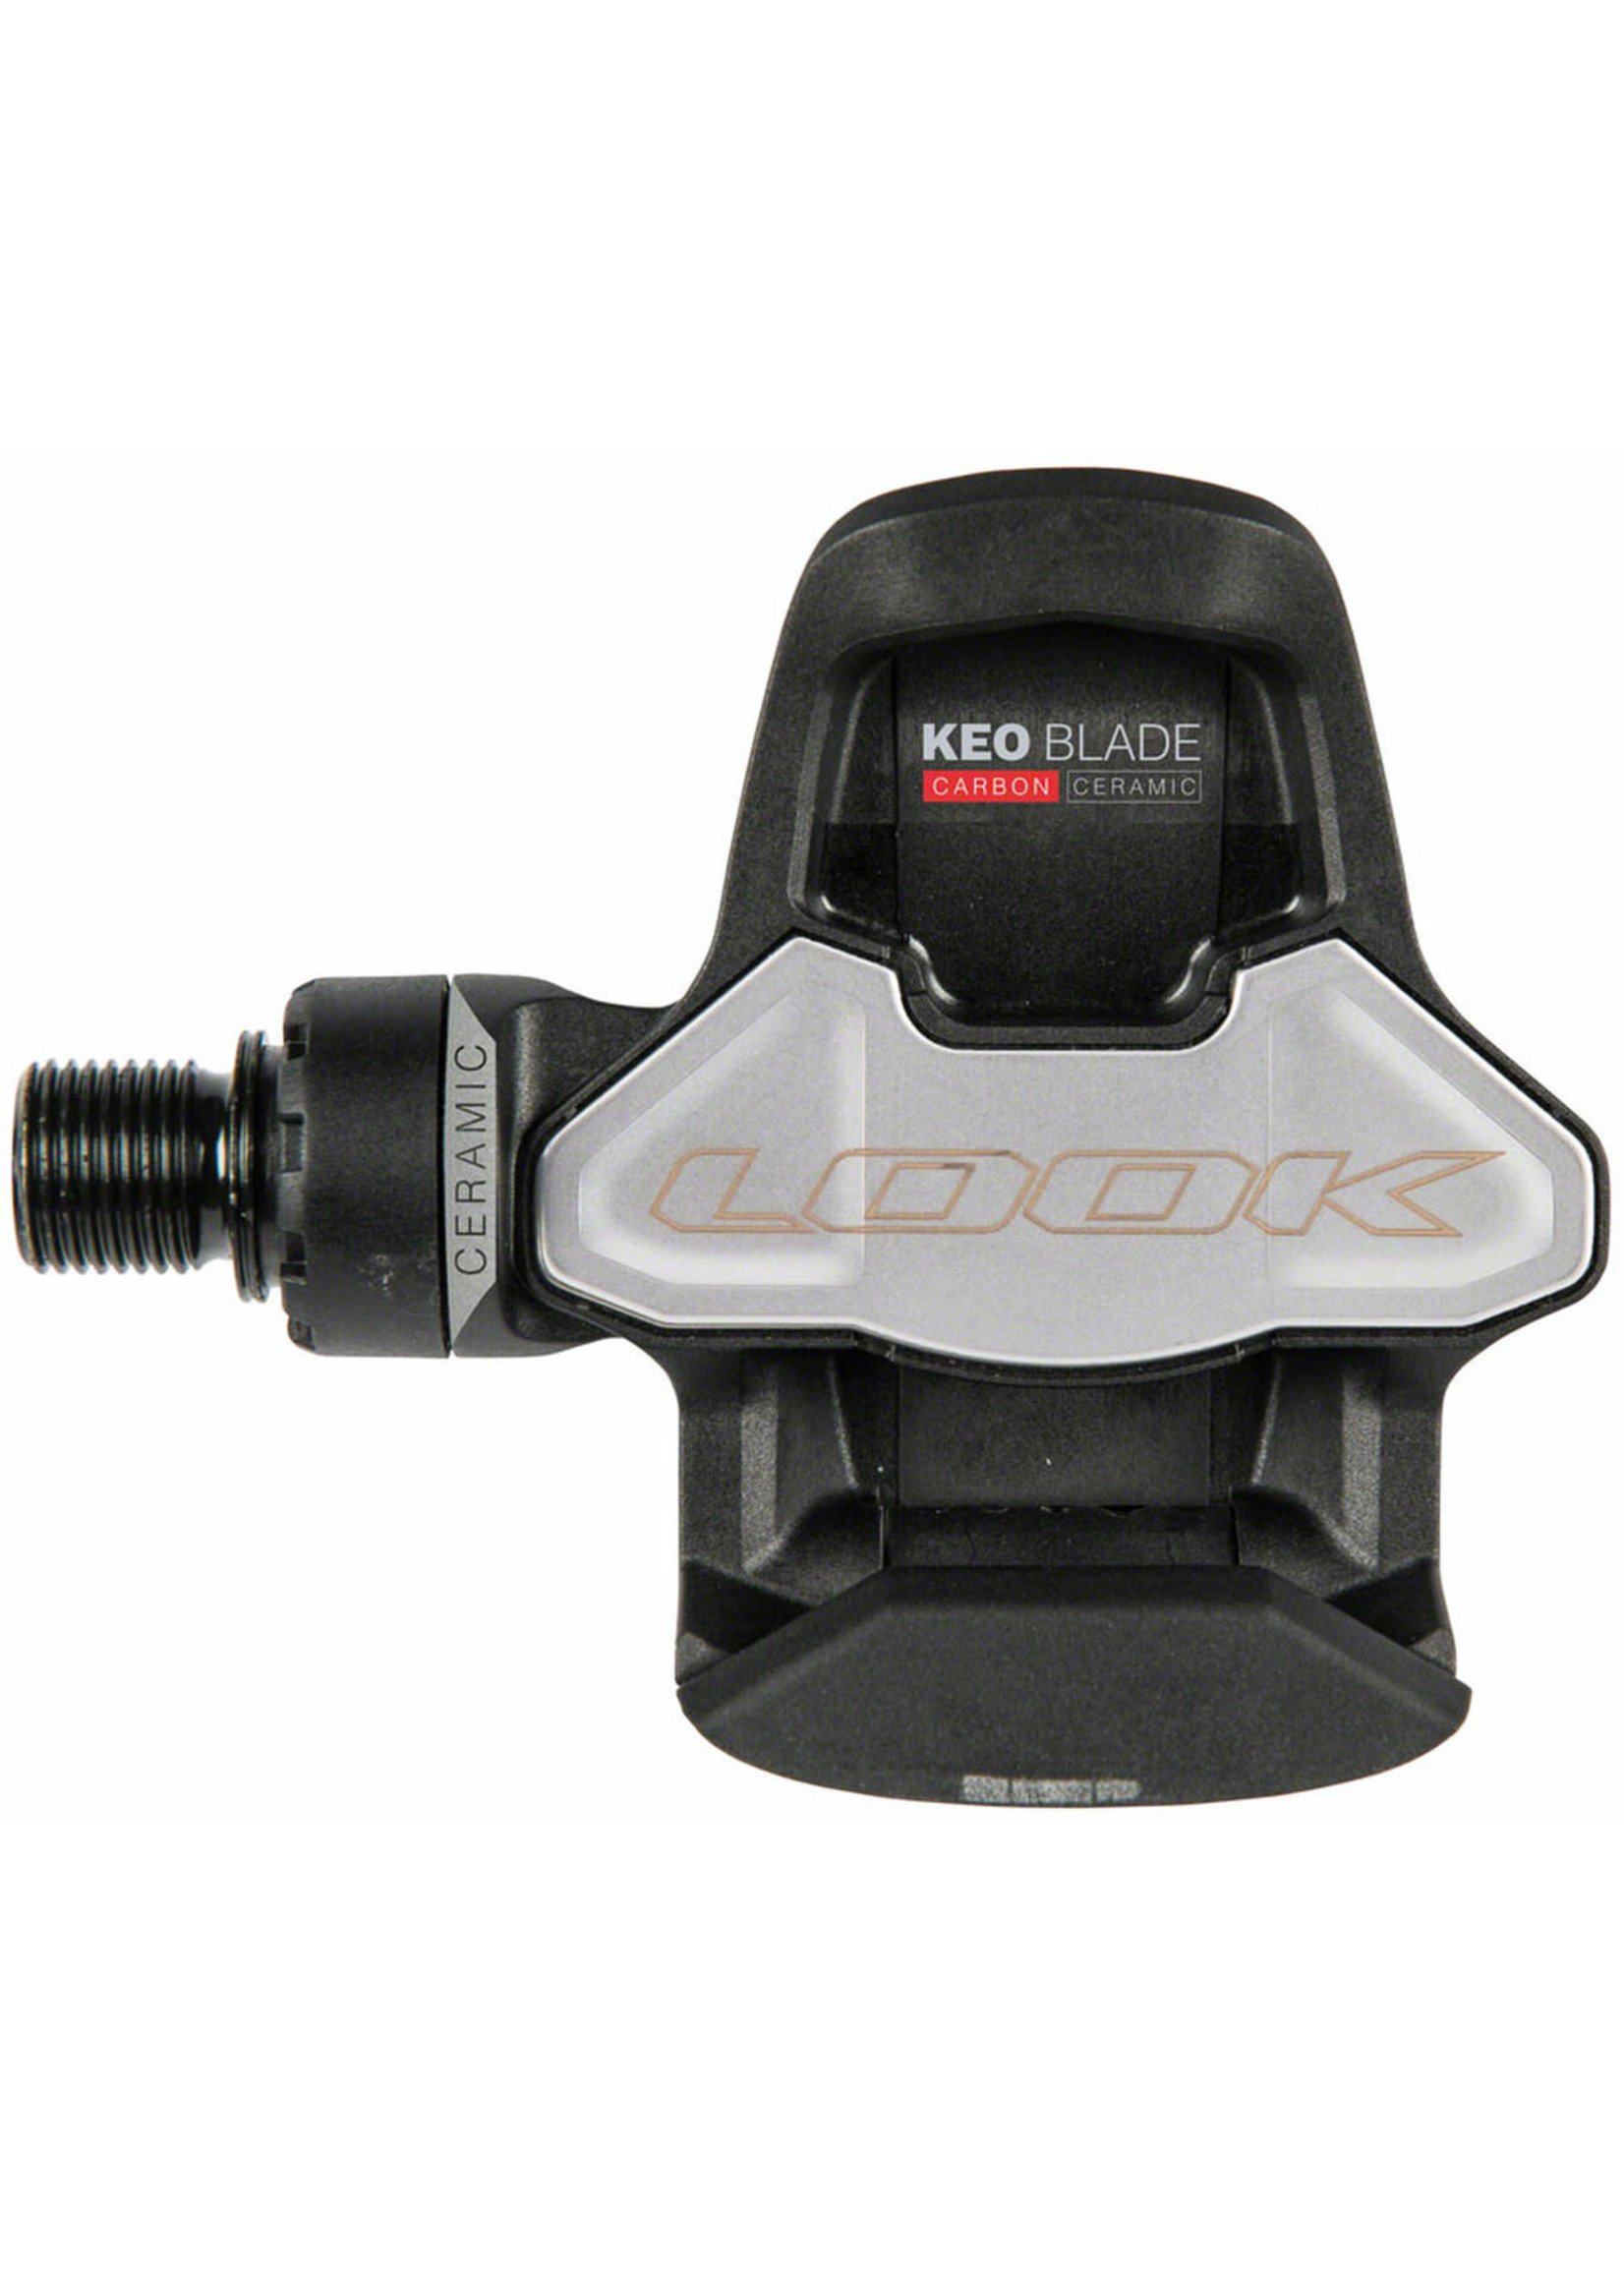 Look LOOK KEO BLADE CARBON CERAMIC Pedals - Single Sided Clipless, Chromoly, 9/16", Black